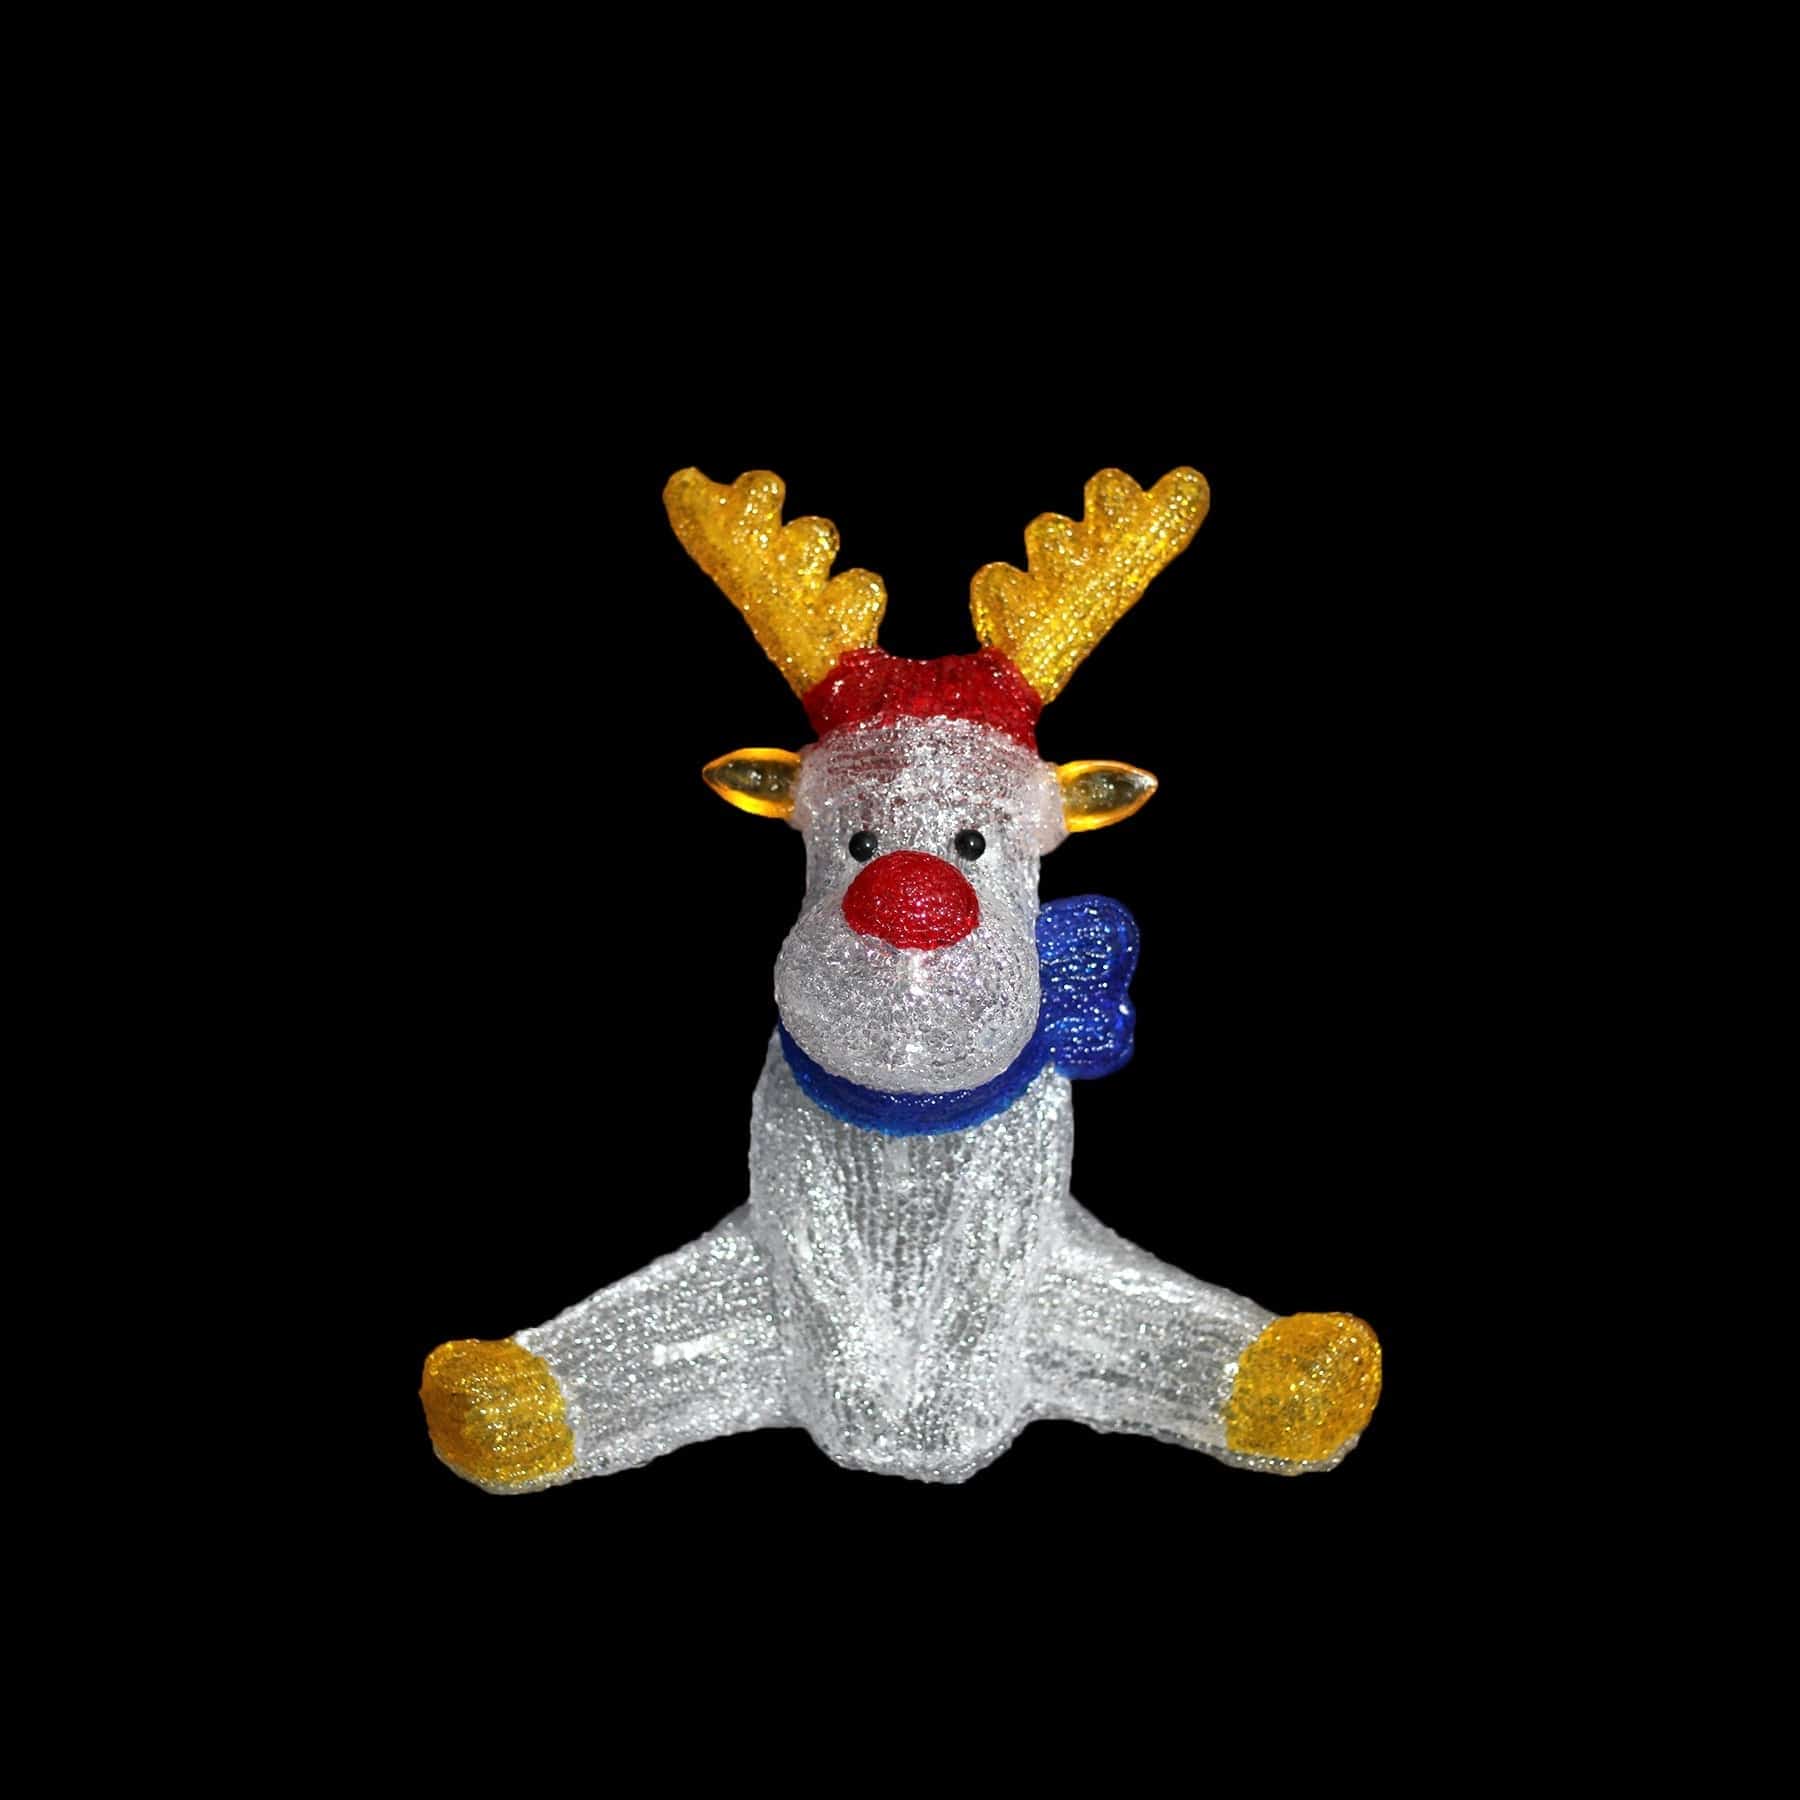 Promo Christmas Figure Acrylic Sitting Red Nose Reindeer - H30cm ACY019-P